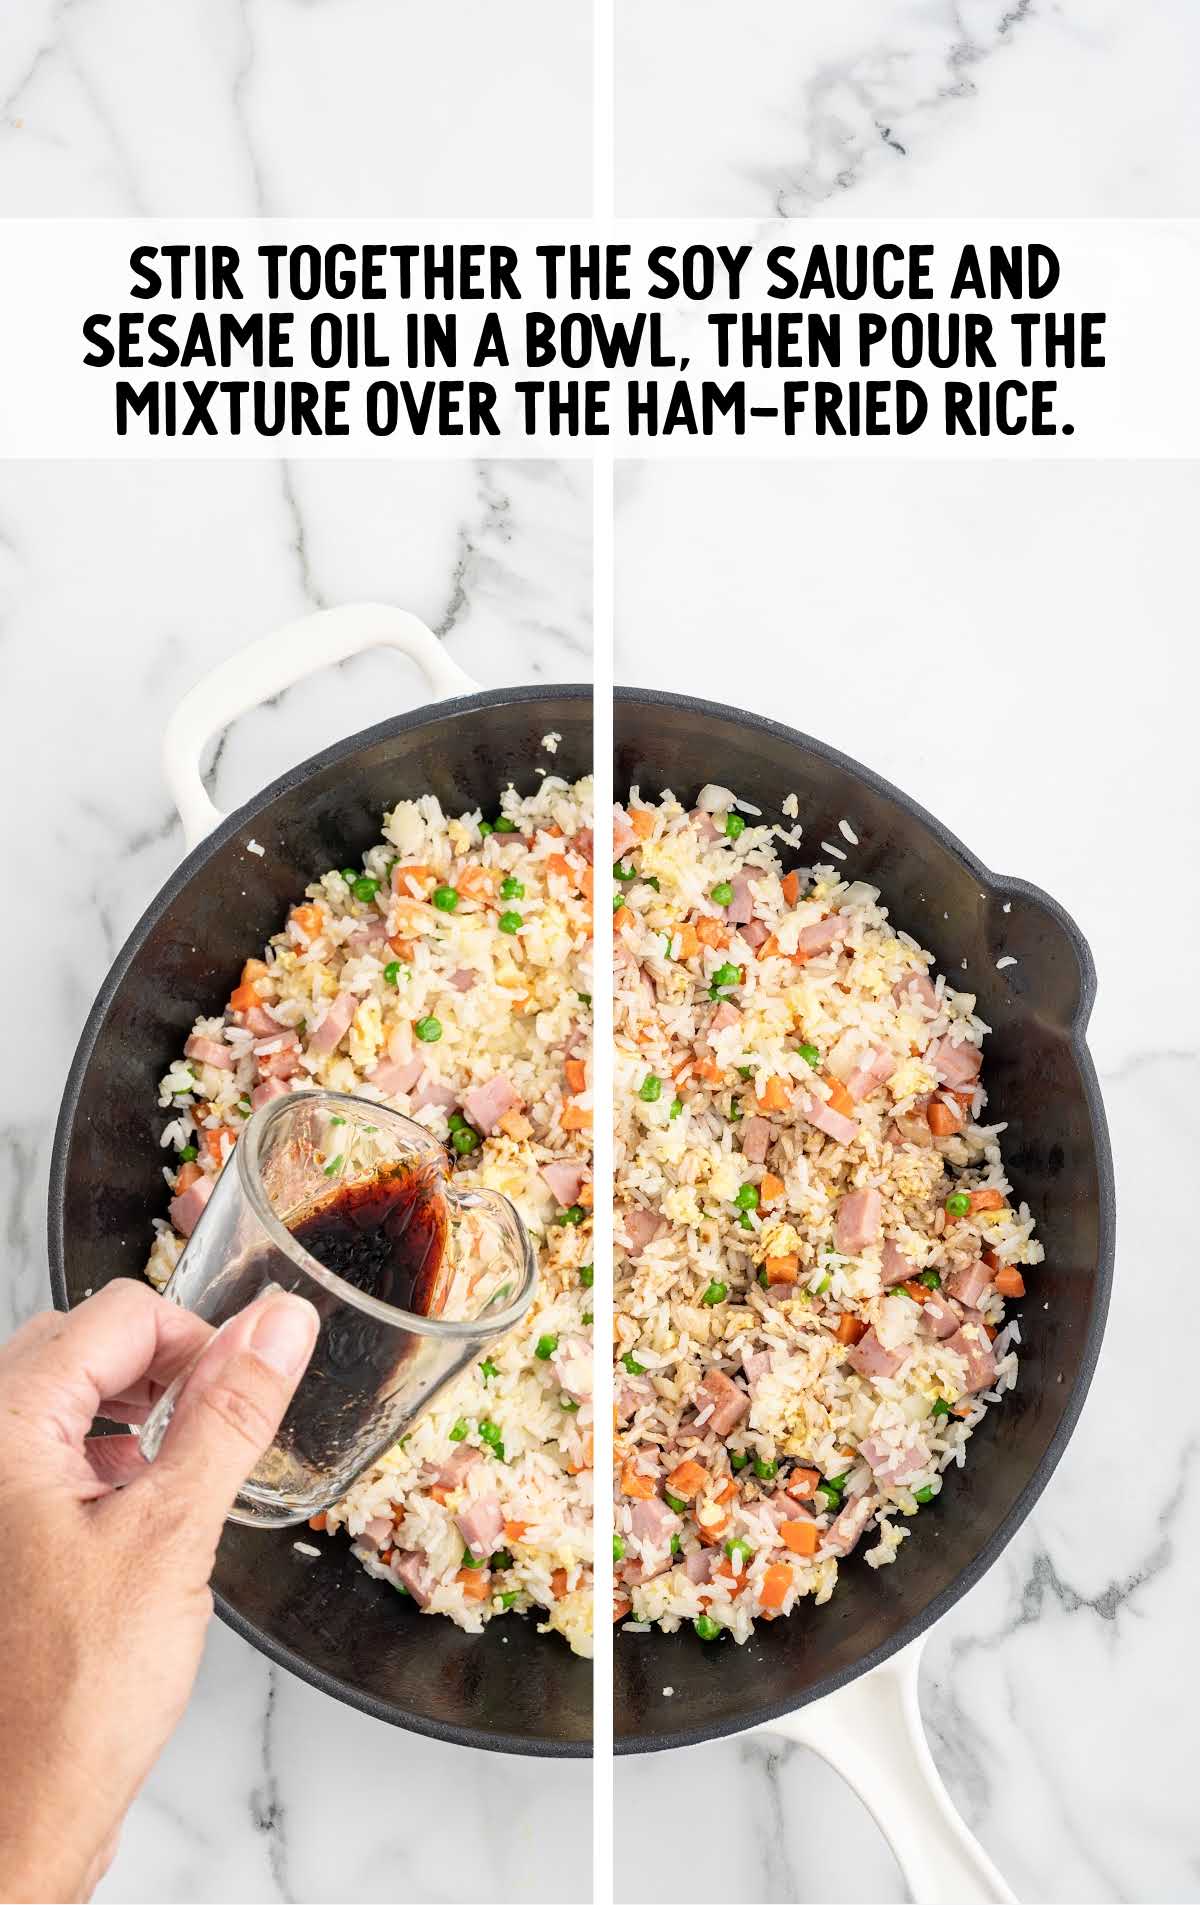 soy sauce and sesame oil added to the skillet of ham fried rice